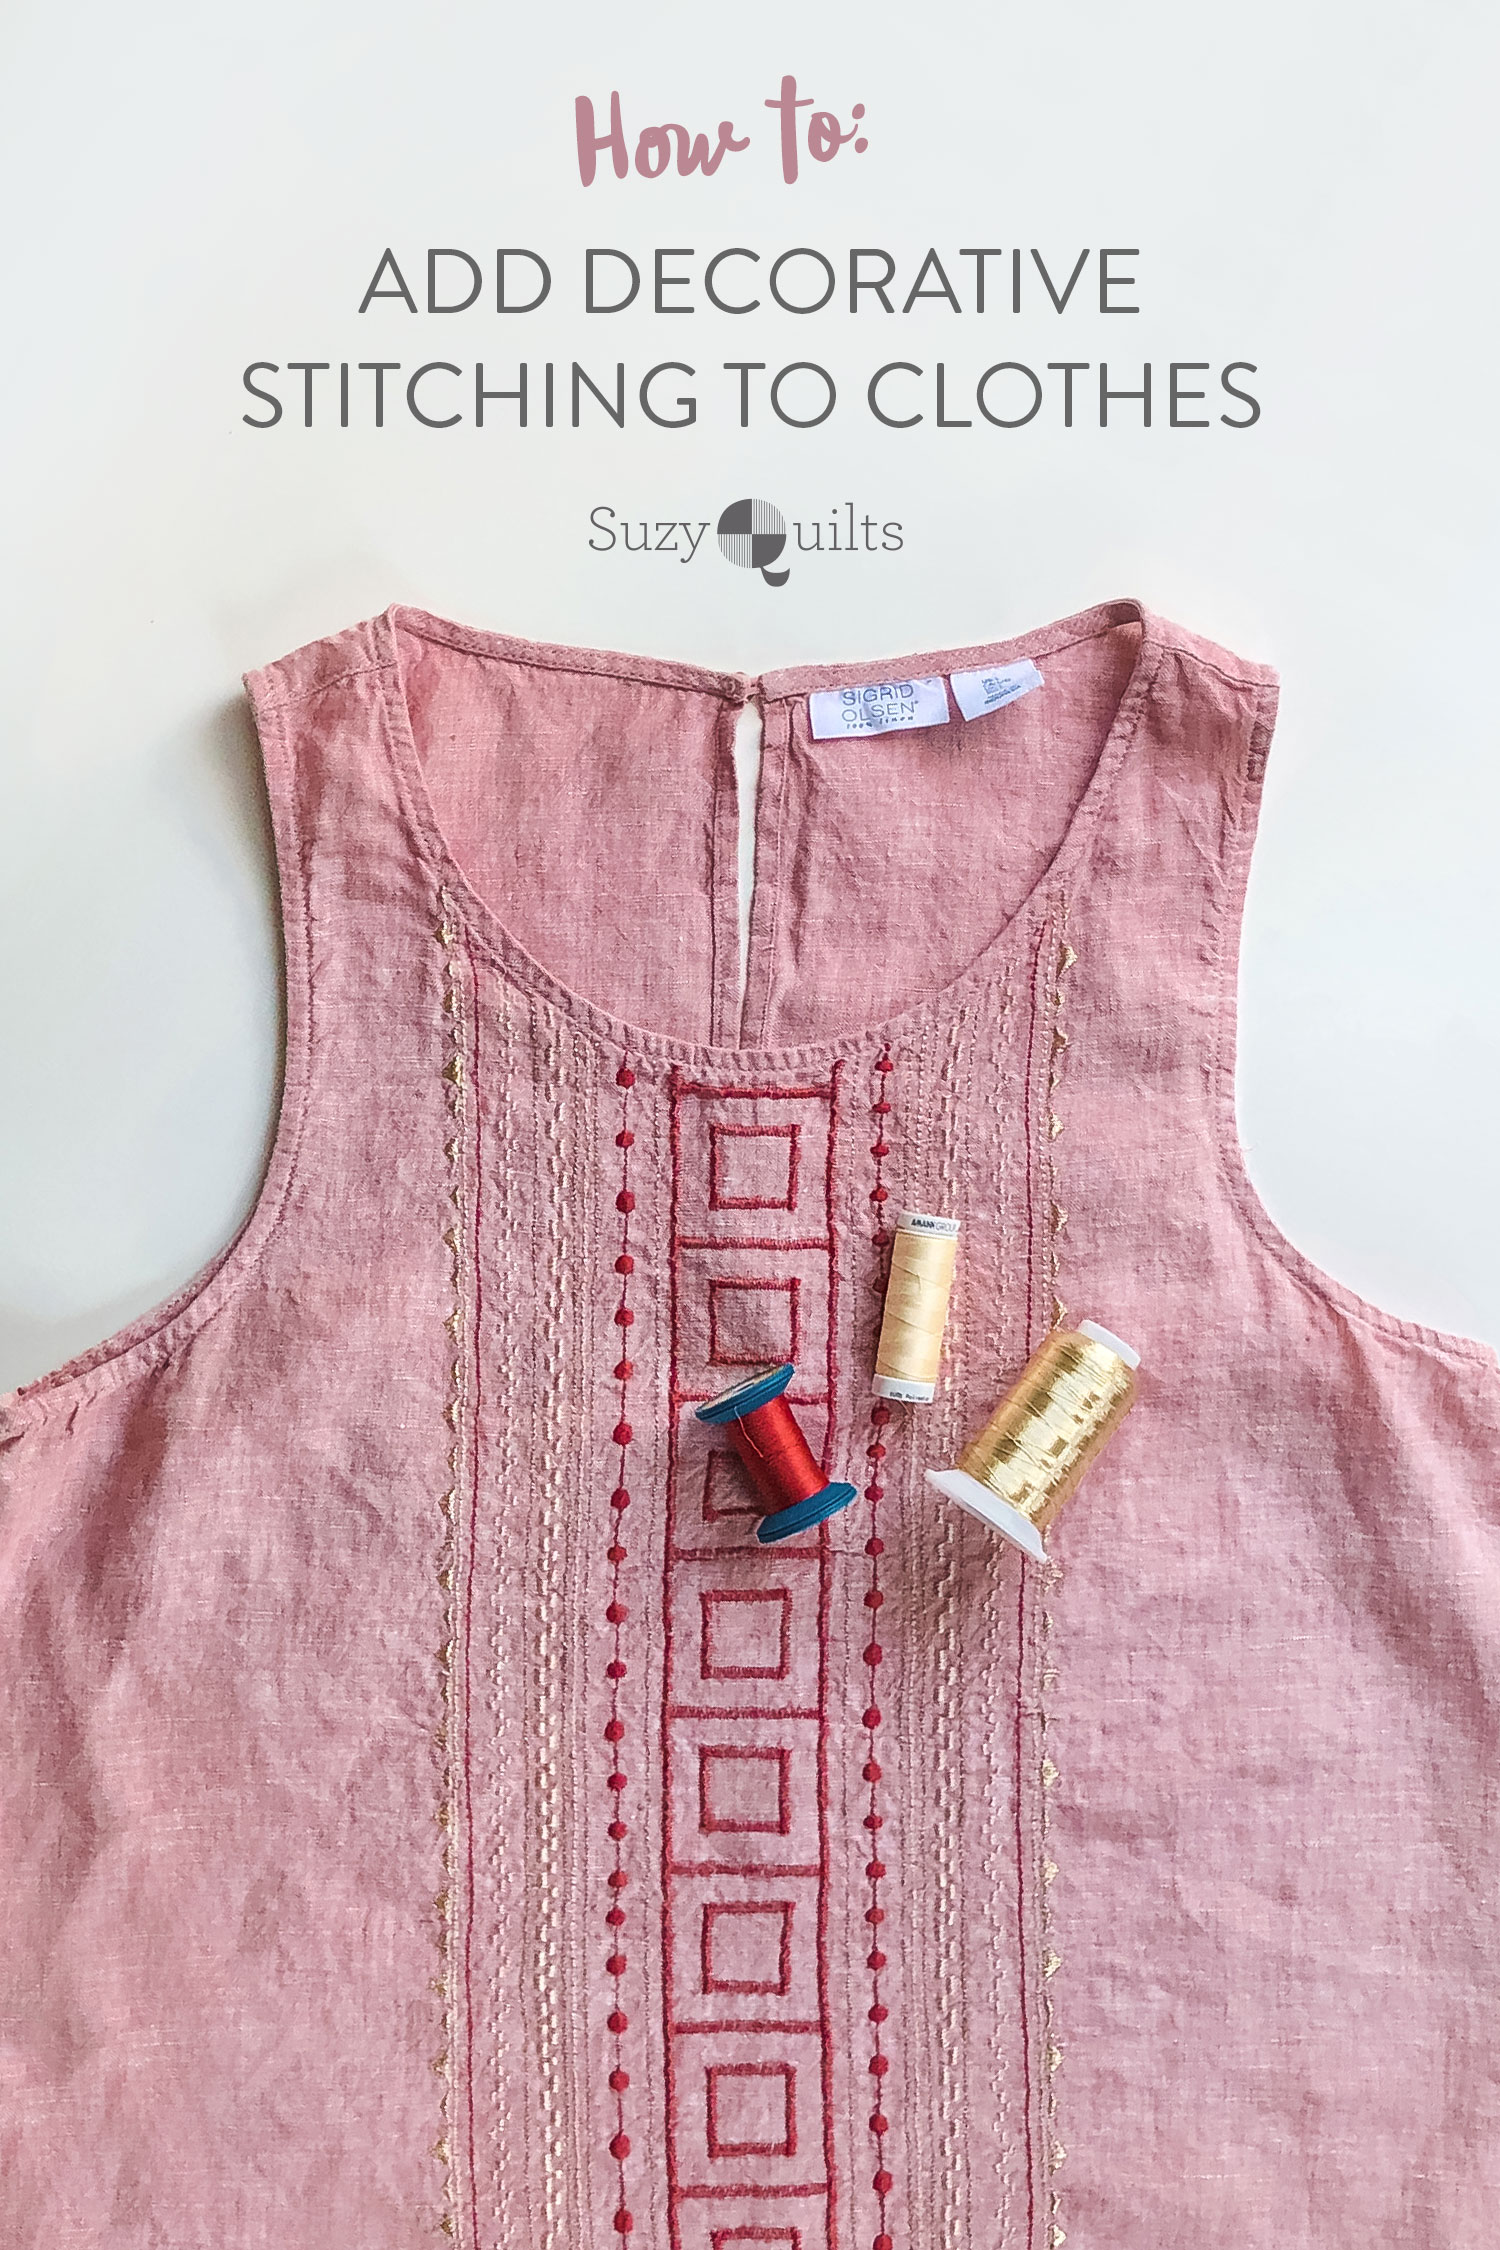 How to use embroidery stitches on your sewing machine! Refresh your wardrobe by adding decorative stitching to clothes! These are simple embroidery stitches on most sewing machines. suzyquilts.com #sewing #DIY